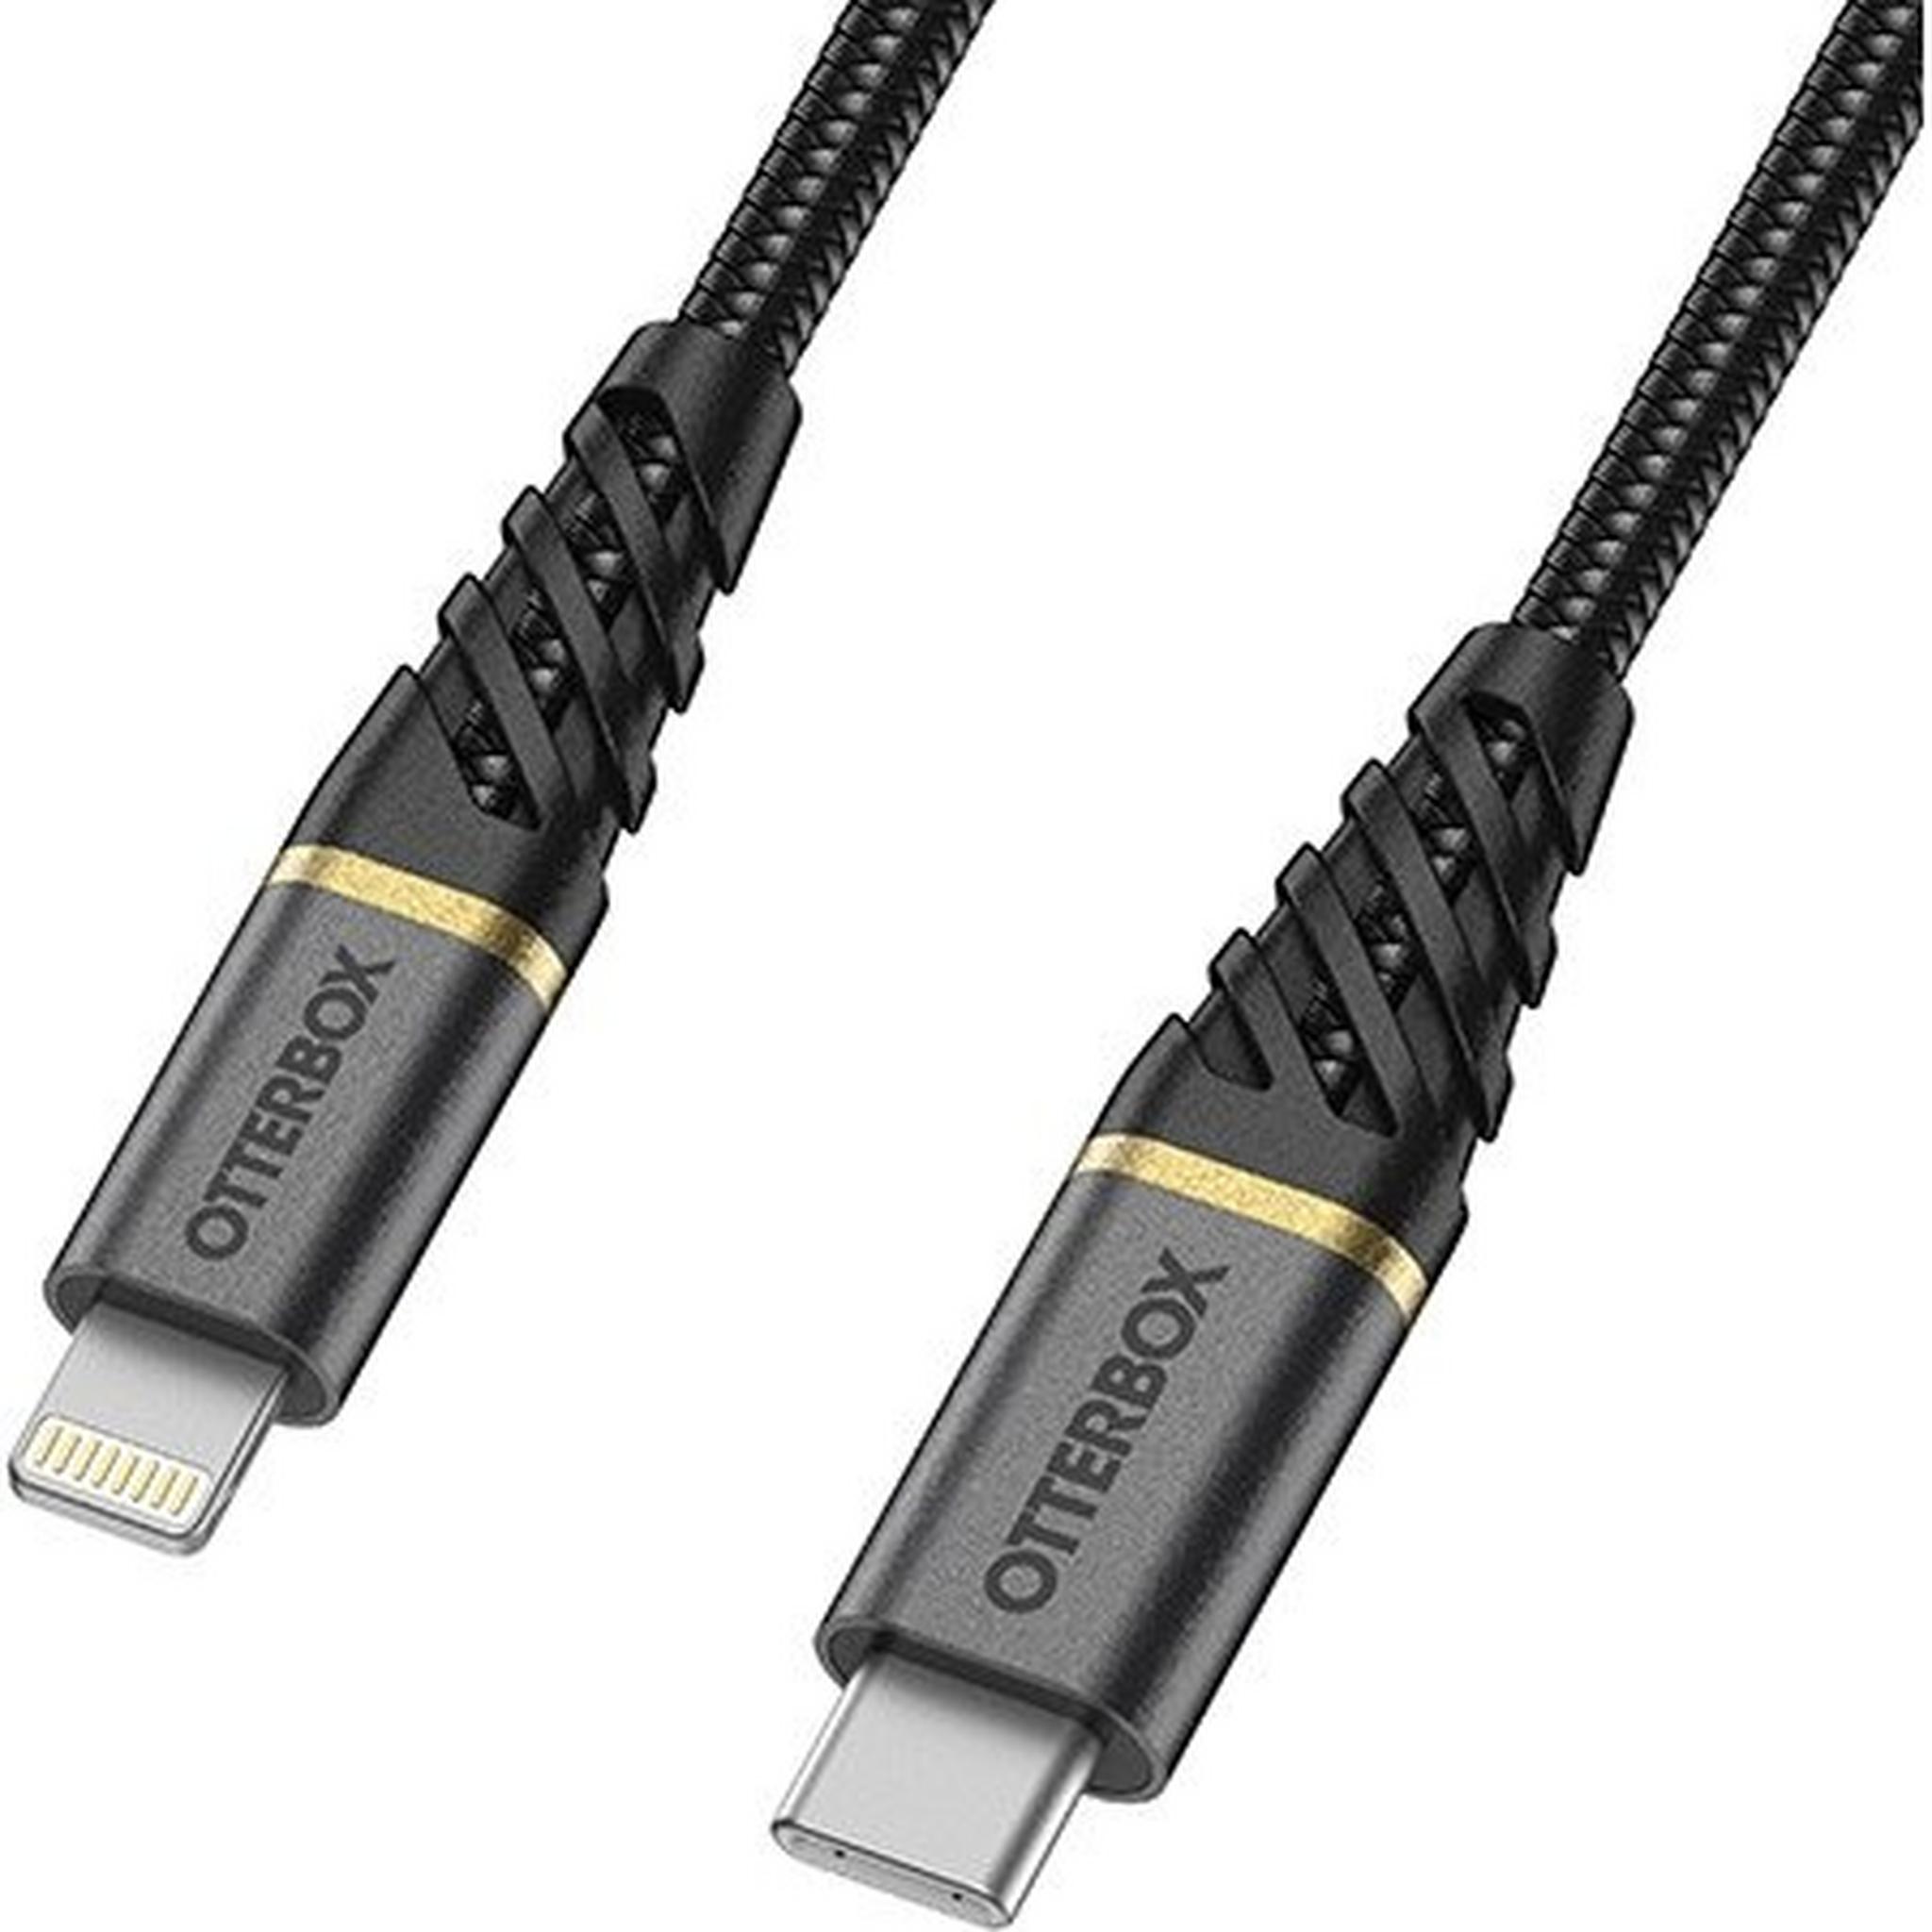 OtterBox Premium USB-A to USB-C Cable 2-Meter (78-52665)- Black